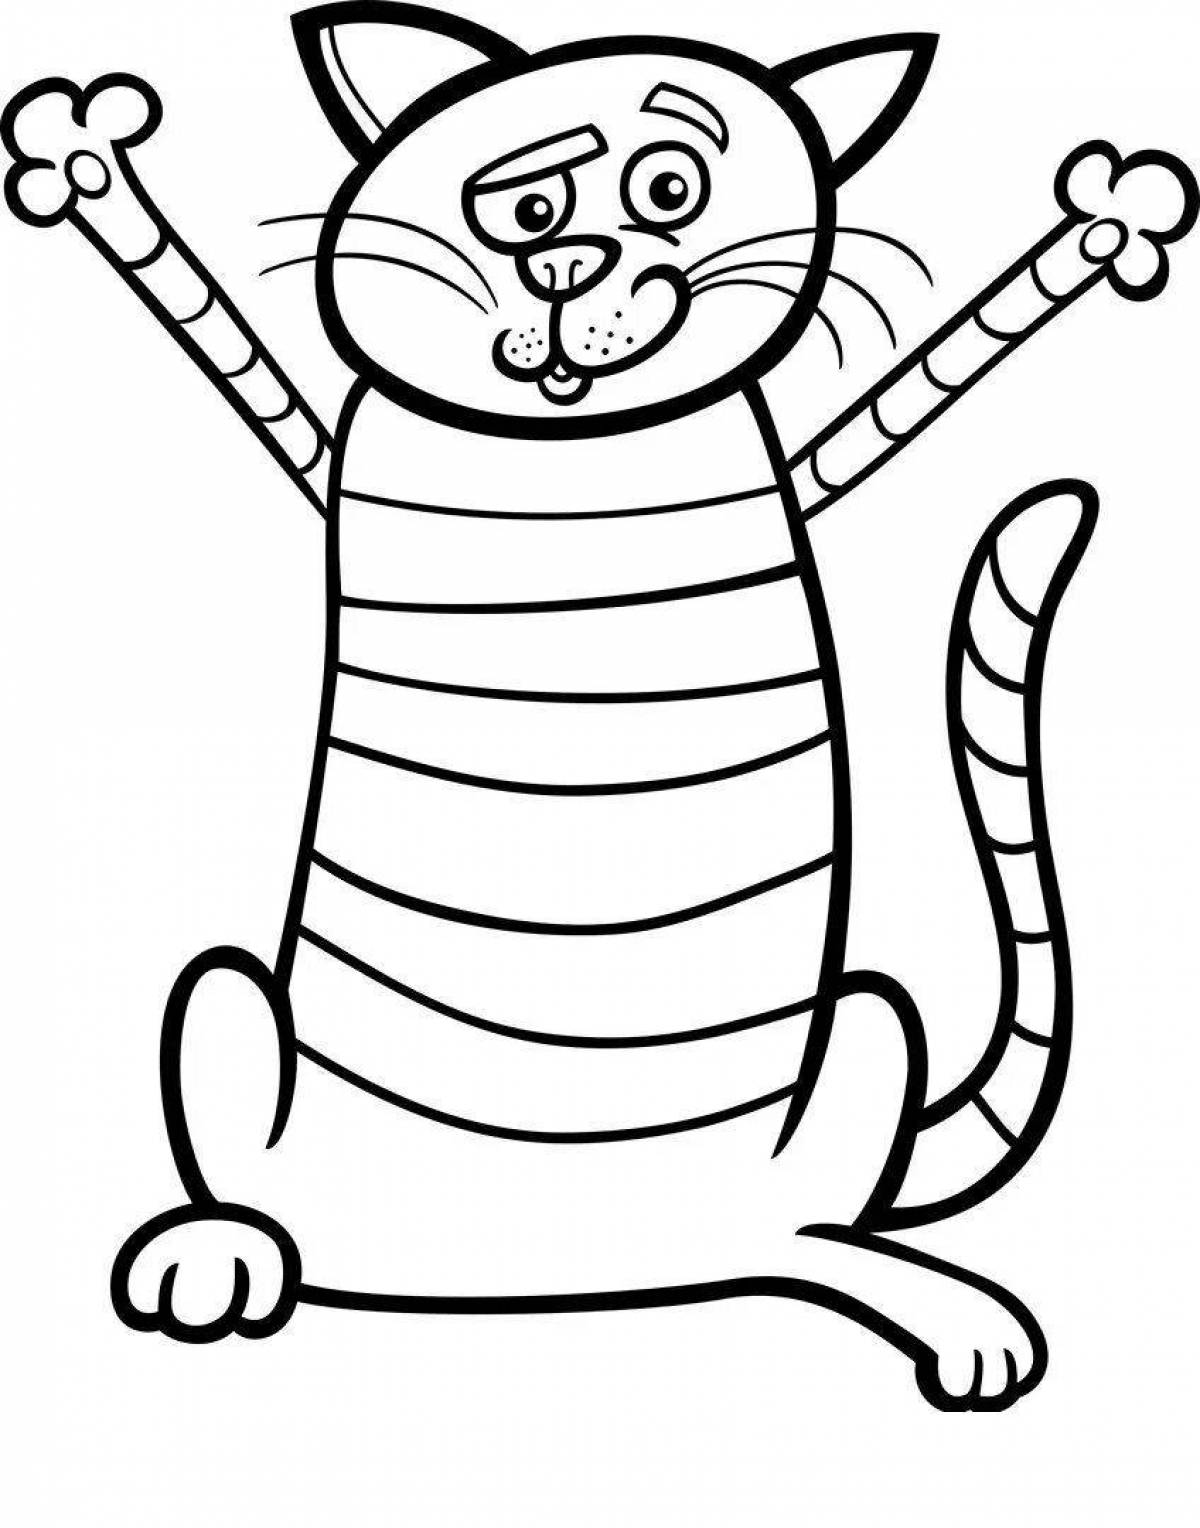 Live tabby cat coloring book